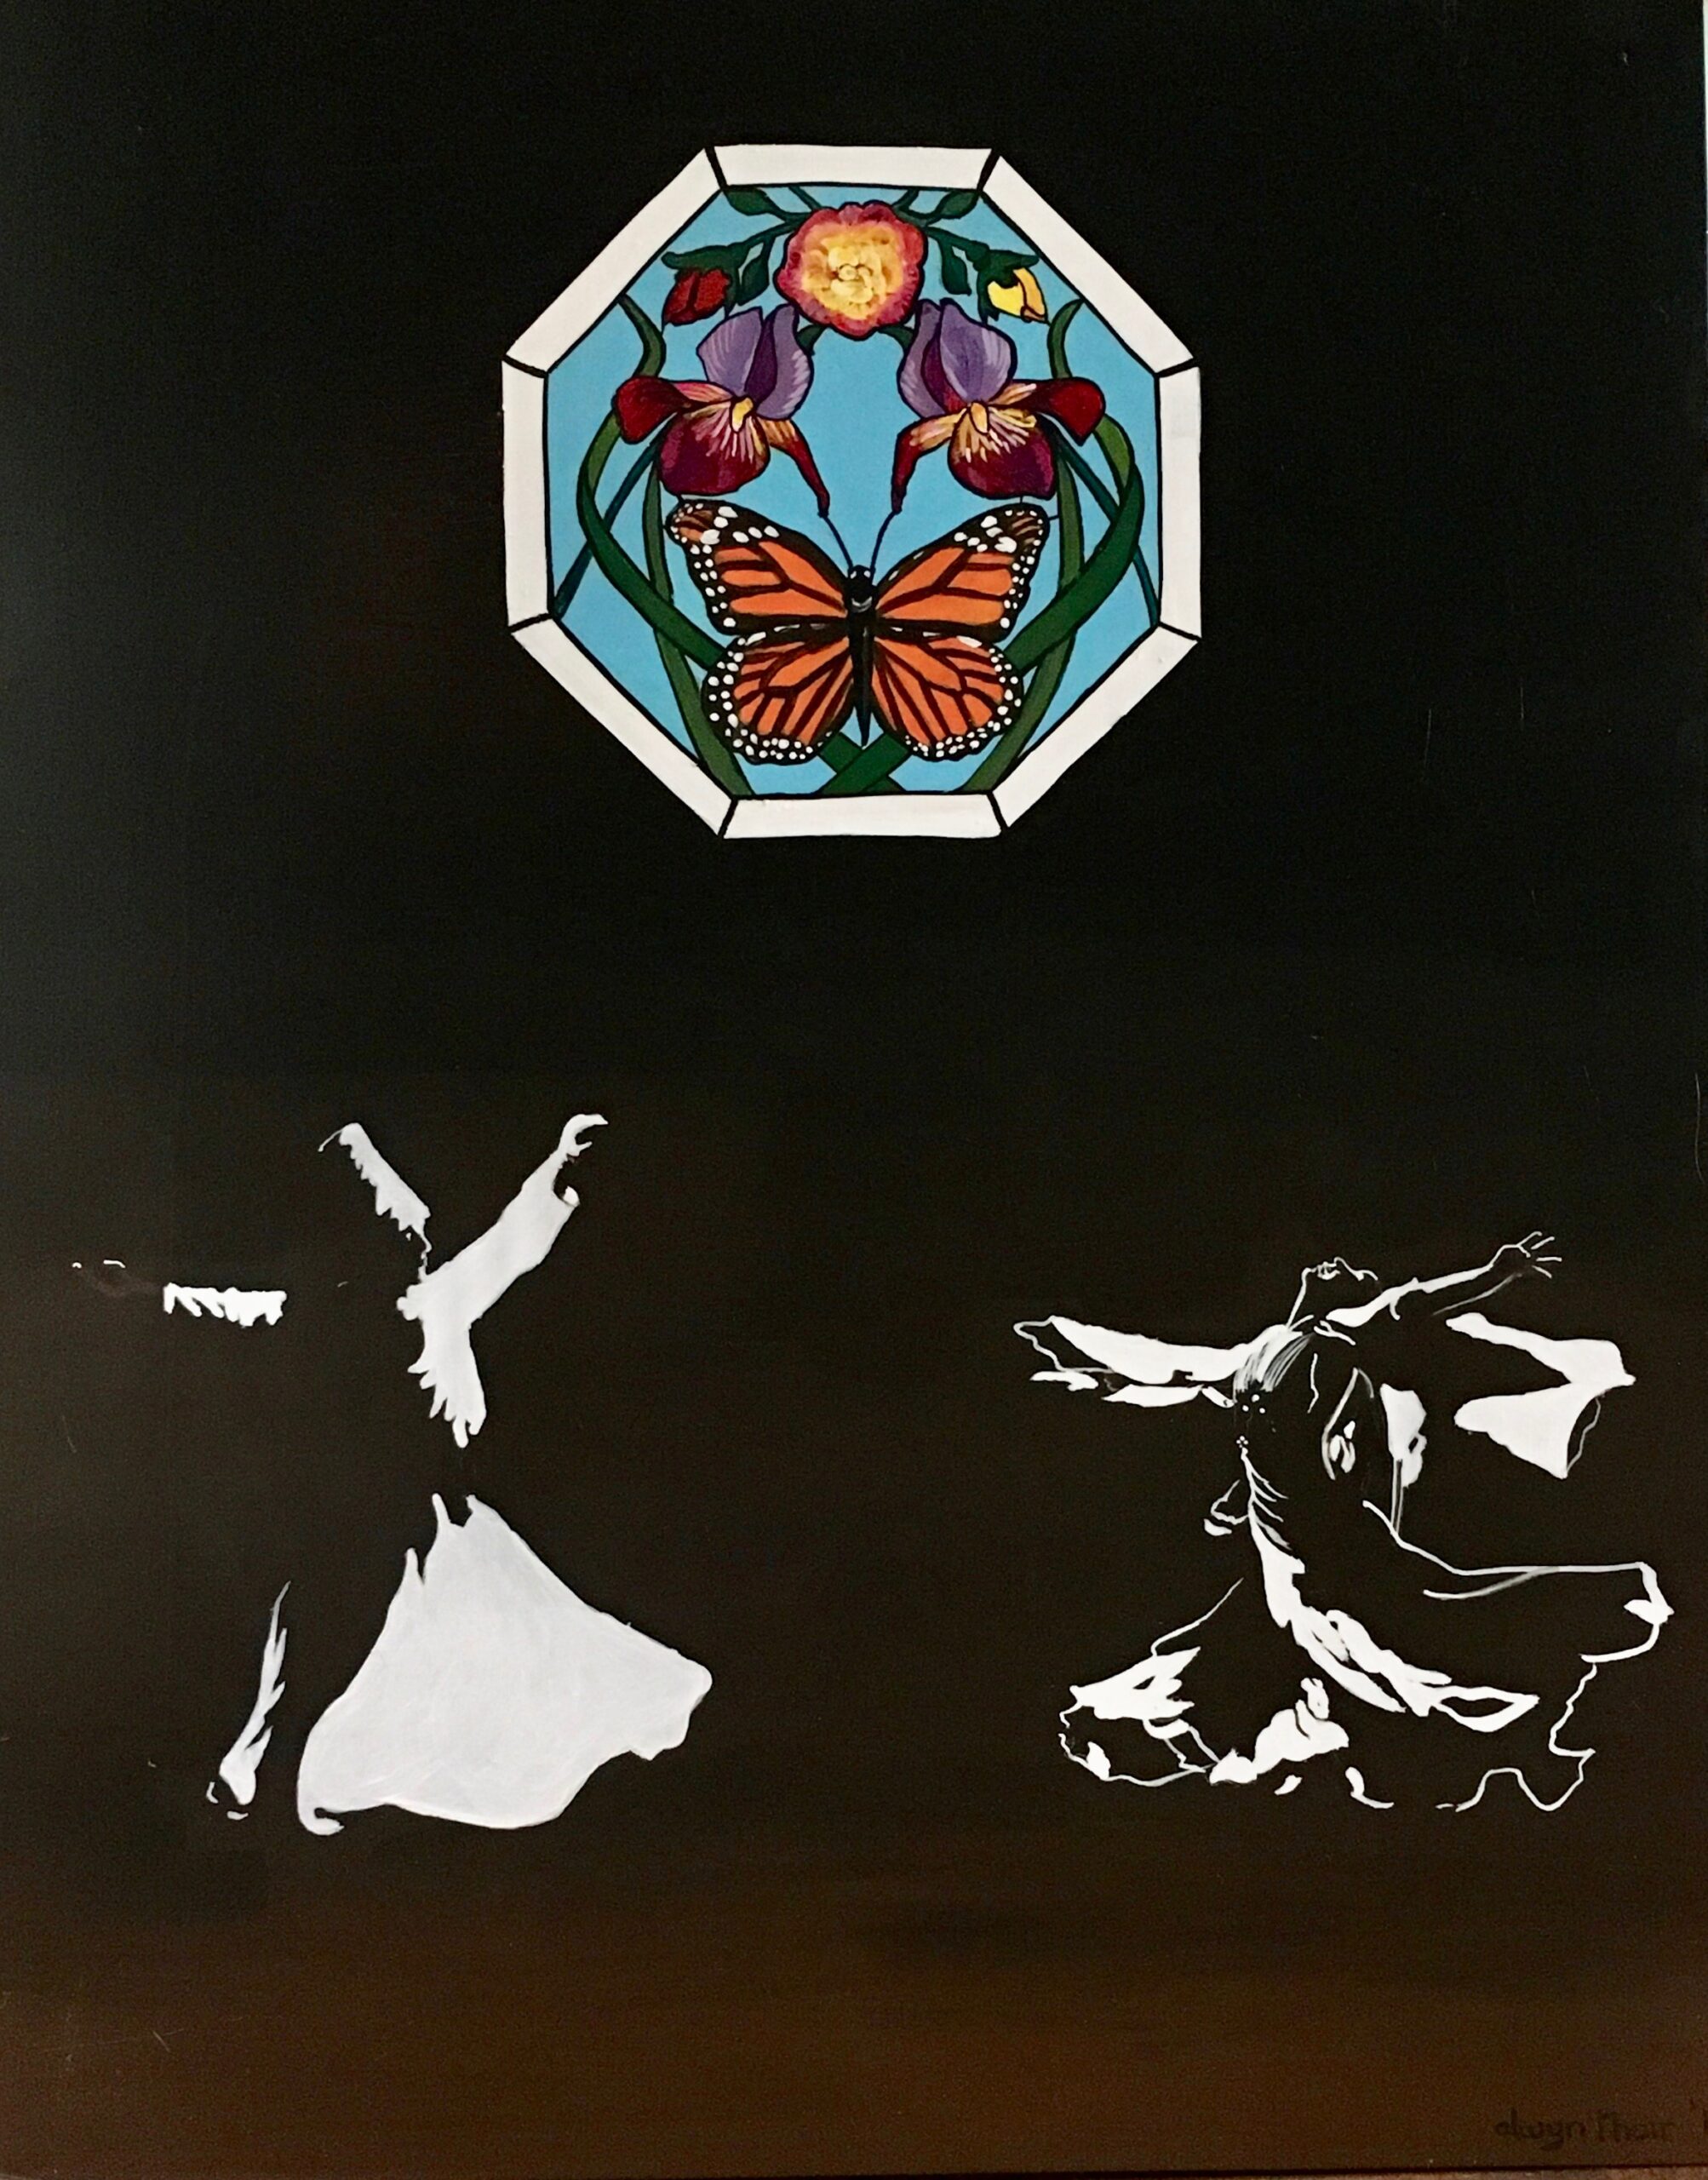 Painting: Sufi dancer silhouettes under a stained glass window.